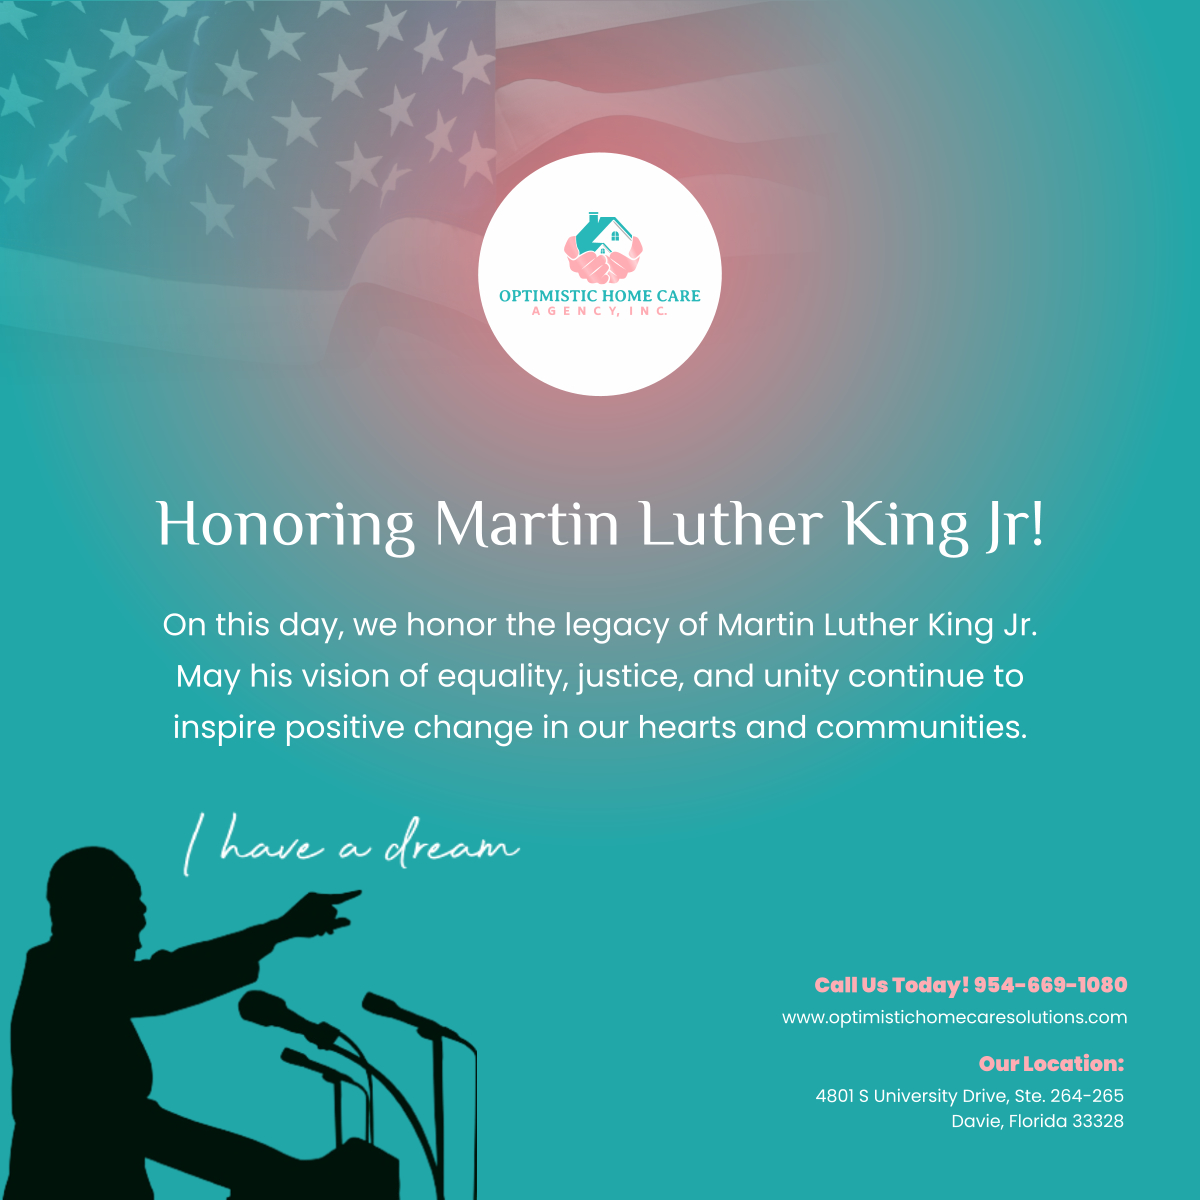 We are celebrating a champion of equality on this special day. May we all reflect on Dr. King's legacy and strive for a brighter and more united future. May this MLK Day be peaceful for all.

#HonoringMLK #CelebrateMLKDay #DavieFL #HomeHealthcare #HomeCare